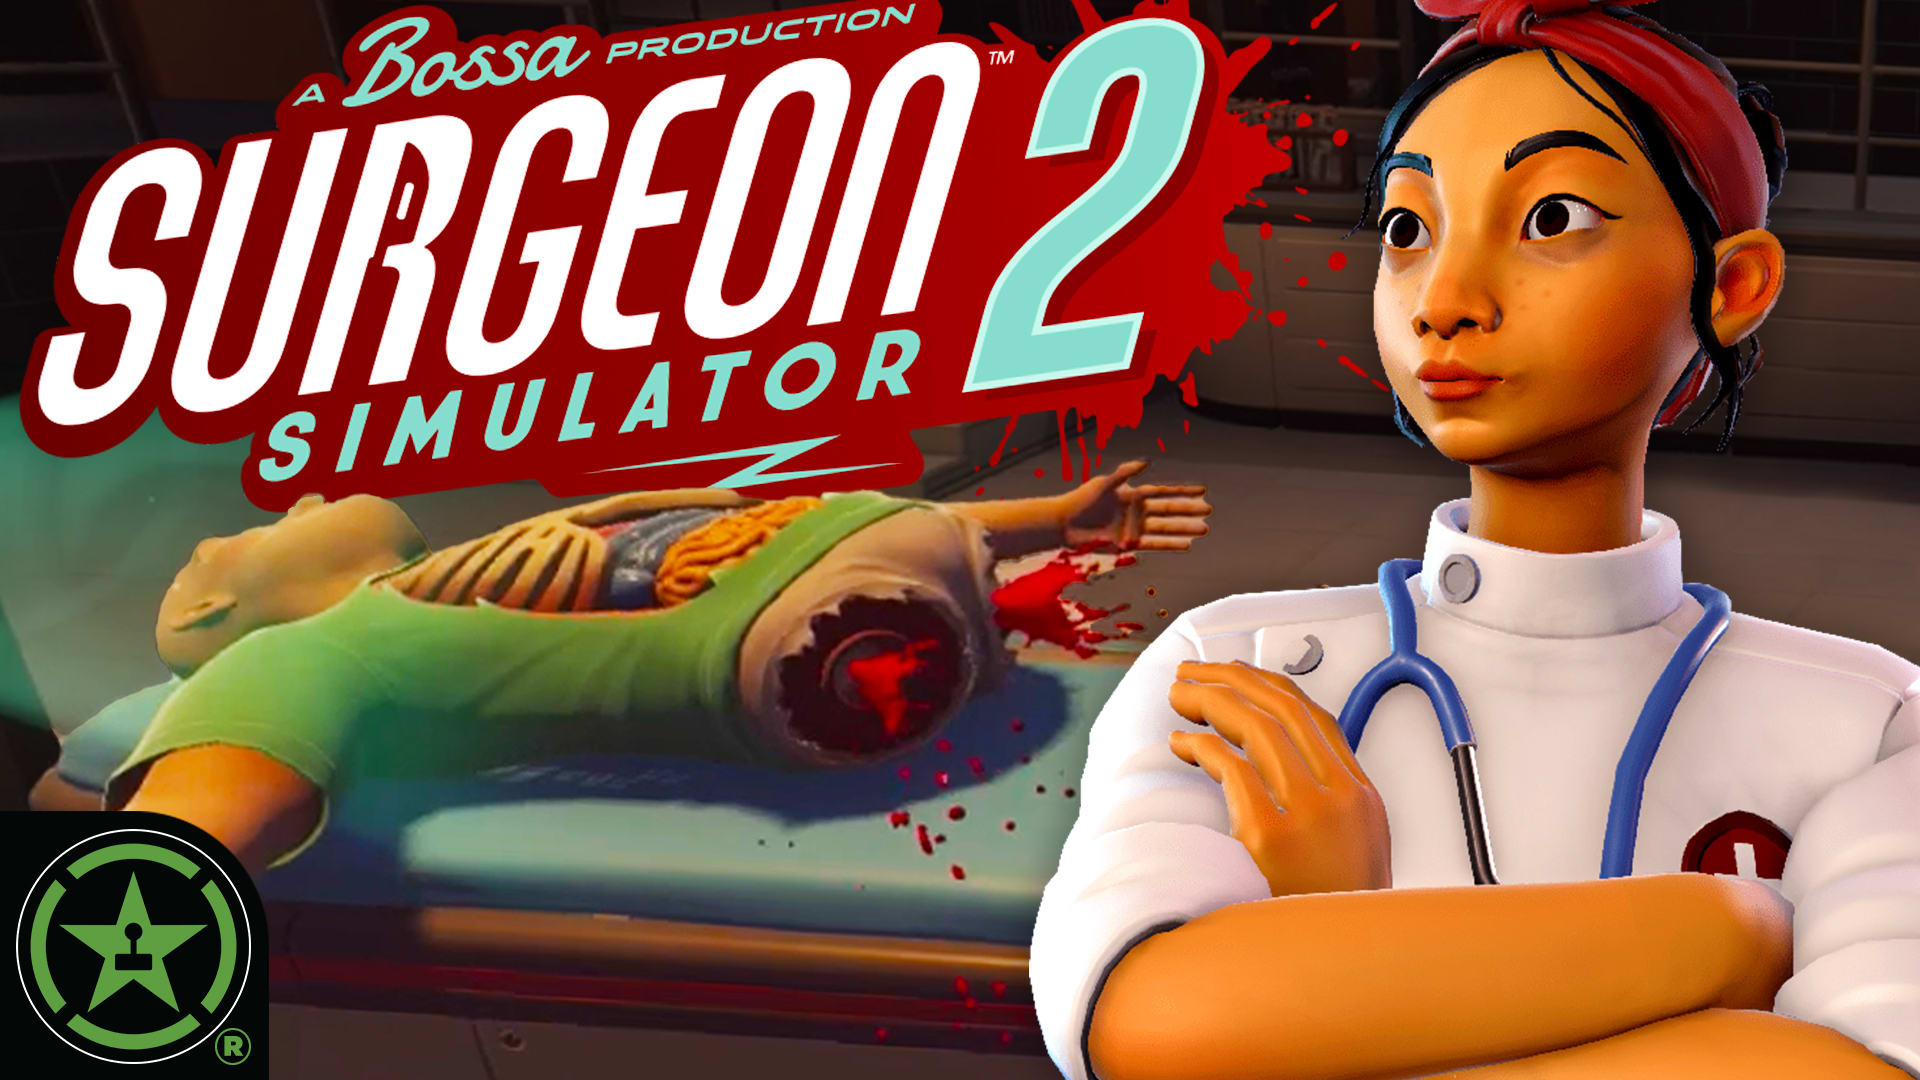 What Happened to His Legs!? - Surgeon Simulator 2 - Rooster Teeth